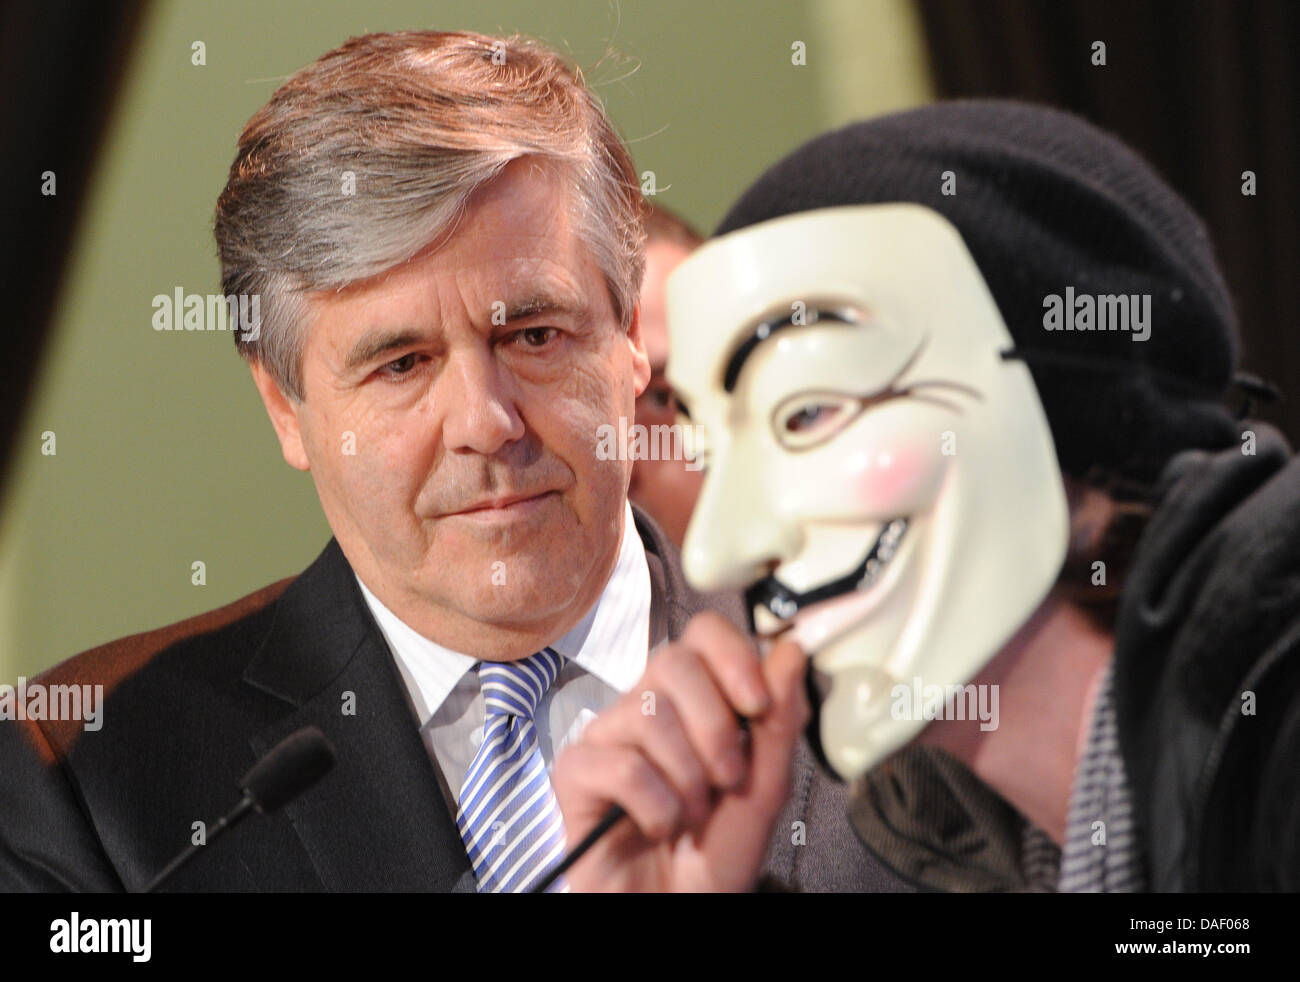 An Occupy activist wearing a Guy Fawkes mask interrupts Joseph Ackermann, CEO of Deutsche Bank, during his speech to the members' meeting of the Ehrbarer Kaufmann (Honorable Merchants) in Hamburg, Germany, 22 November 2011. Several activists of the Occupy movement disrupted the speech of the bank chief and stormed the podium at the chamber of commerce in Hamburg. Photo: MARCUS BRAN Stock Photo